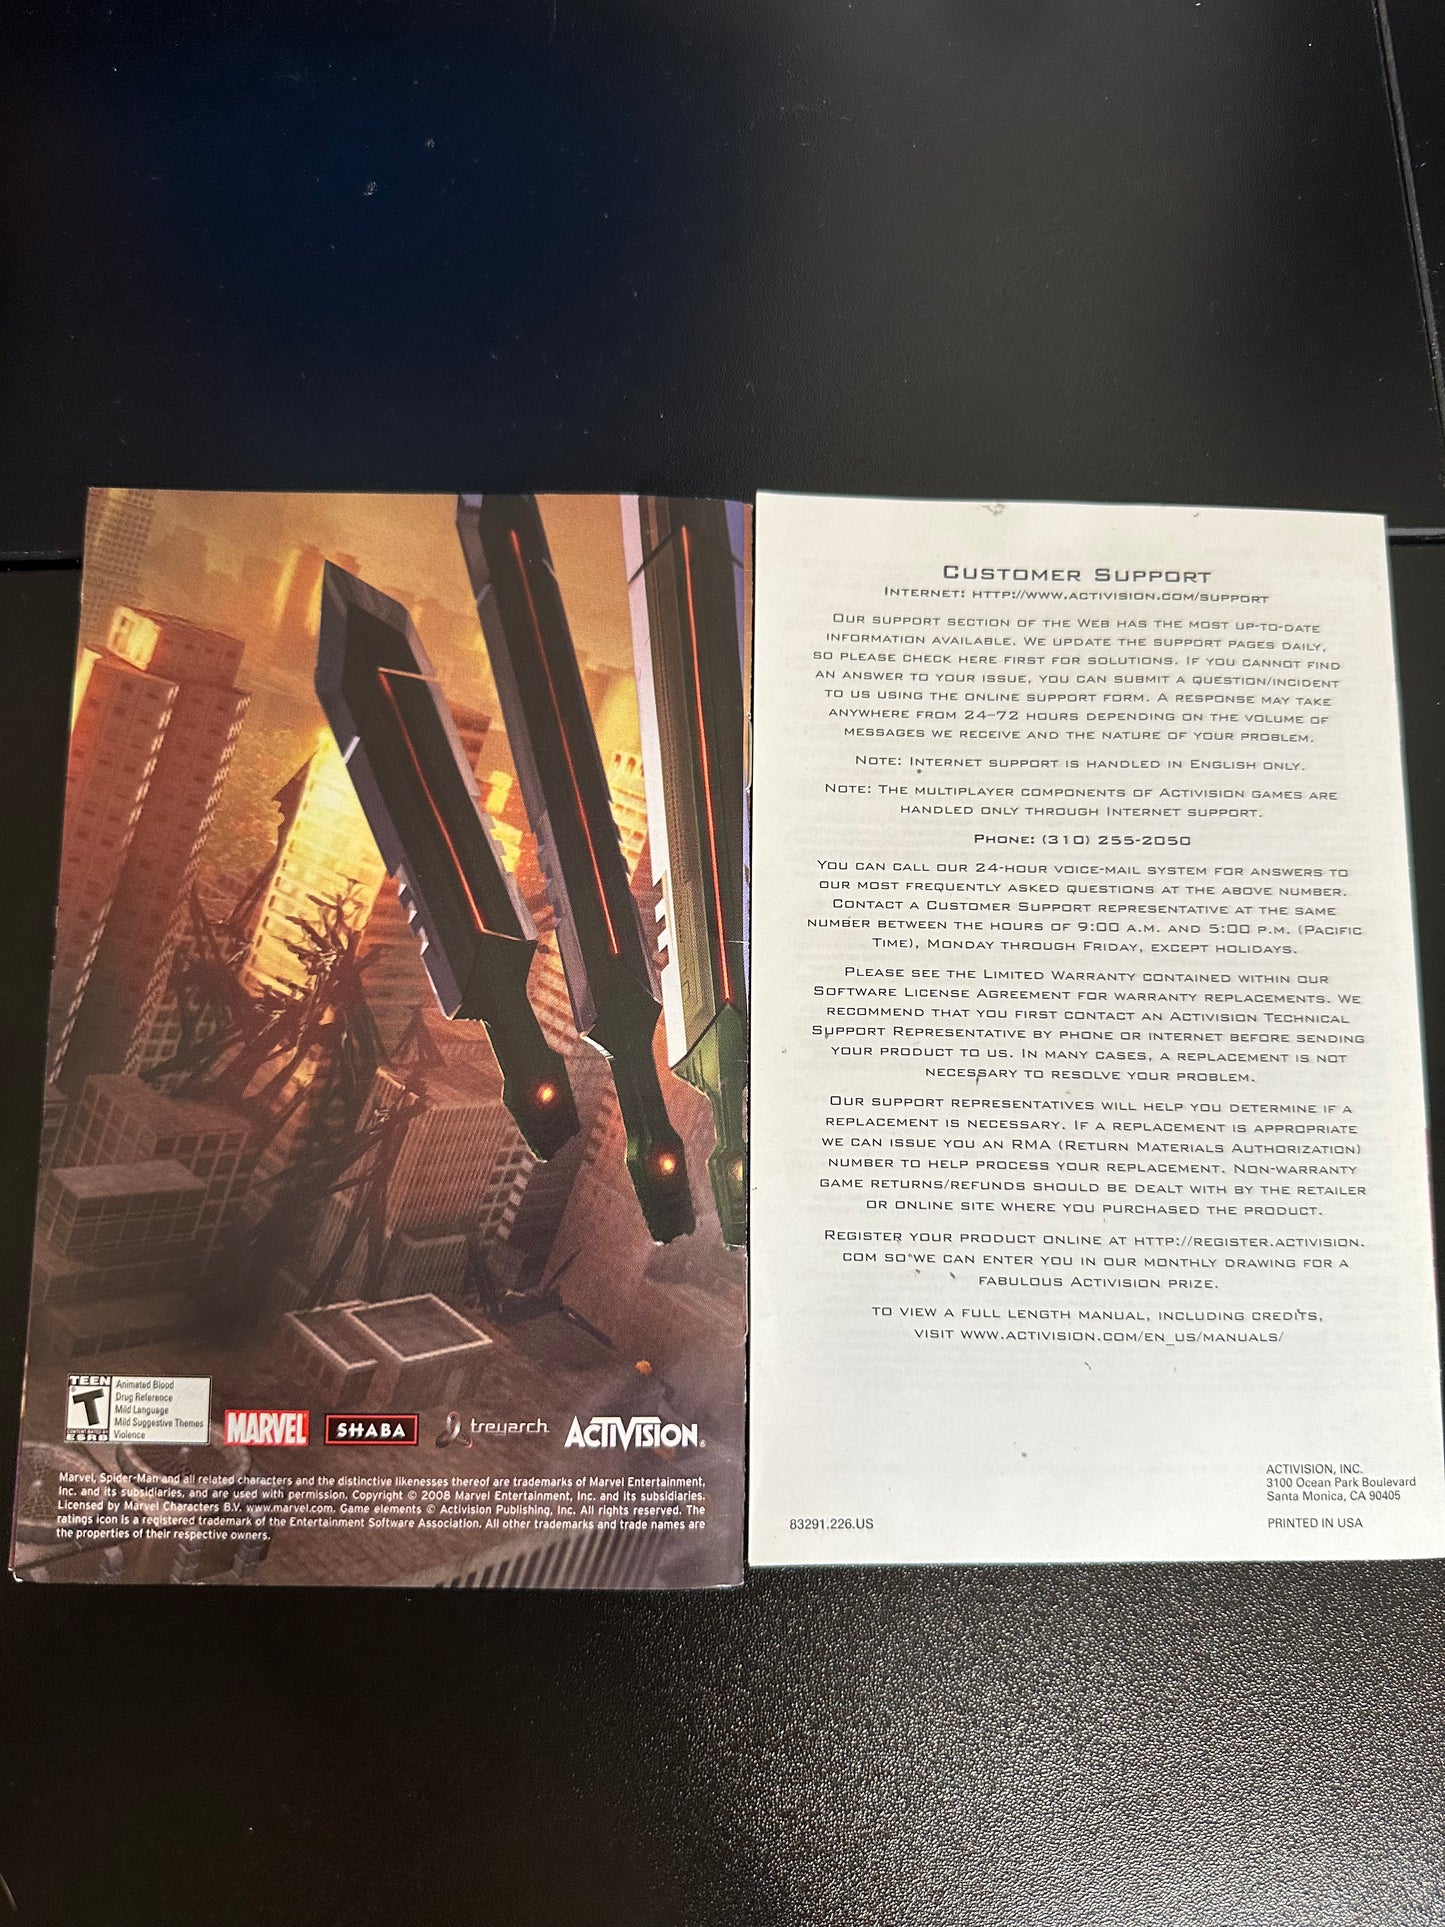 Spider-Man Web of Shadows Manual and Comic Only Xbox 360